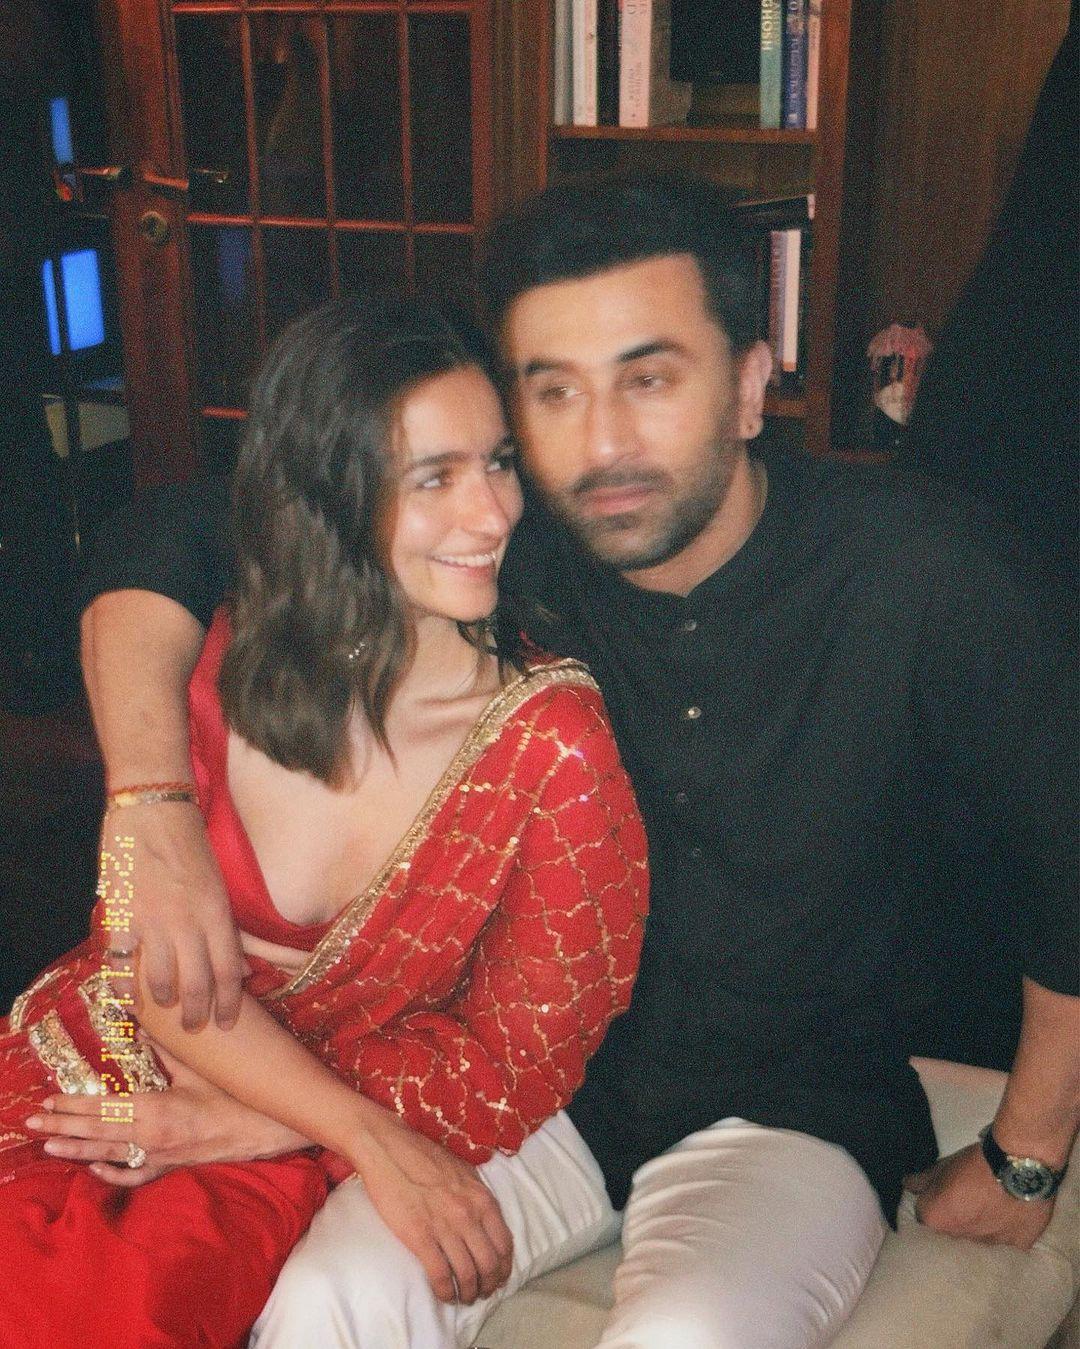 Alia Bhatt is married to Ranbir Kapoor, who belongs to the illustrious Kapoor family. He is a beloved figure in the industry. Together they have a daughter named 'Raha'